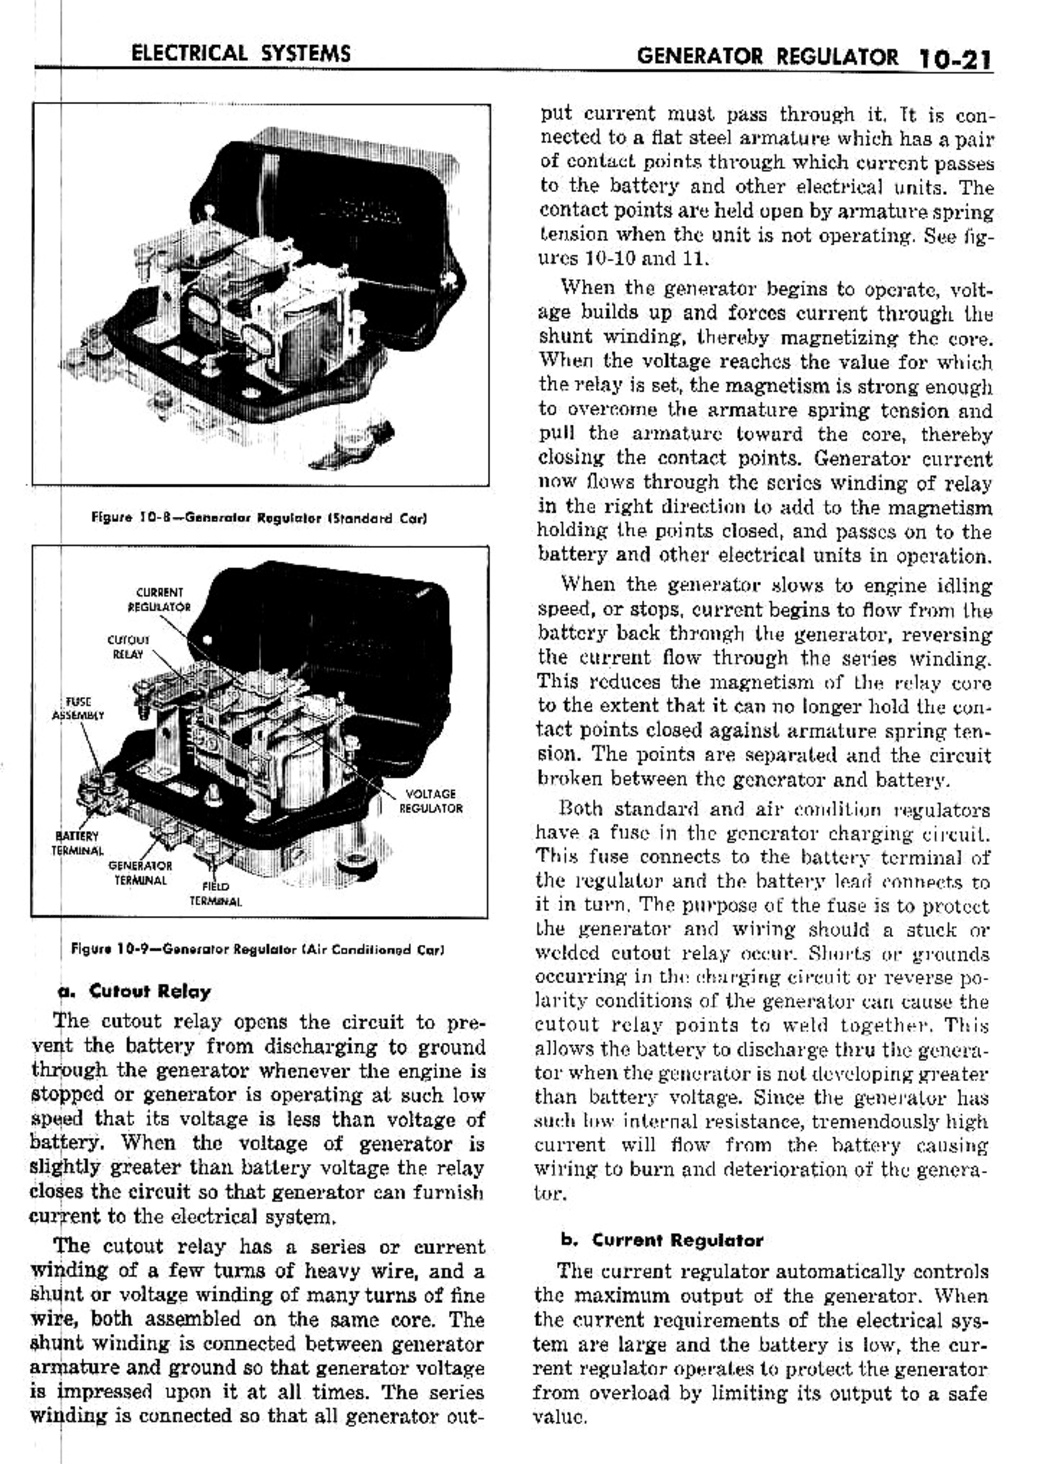 n_11 1959 Buick Shop Manual - Electrical Systems-021-021.jpg